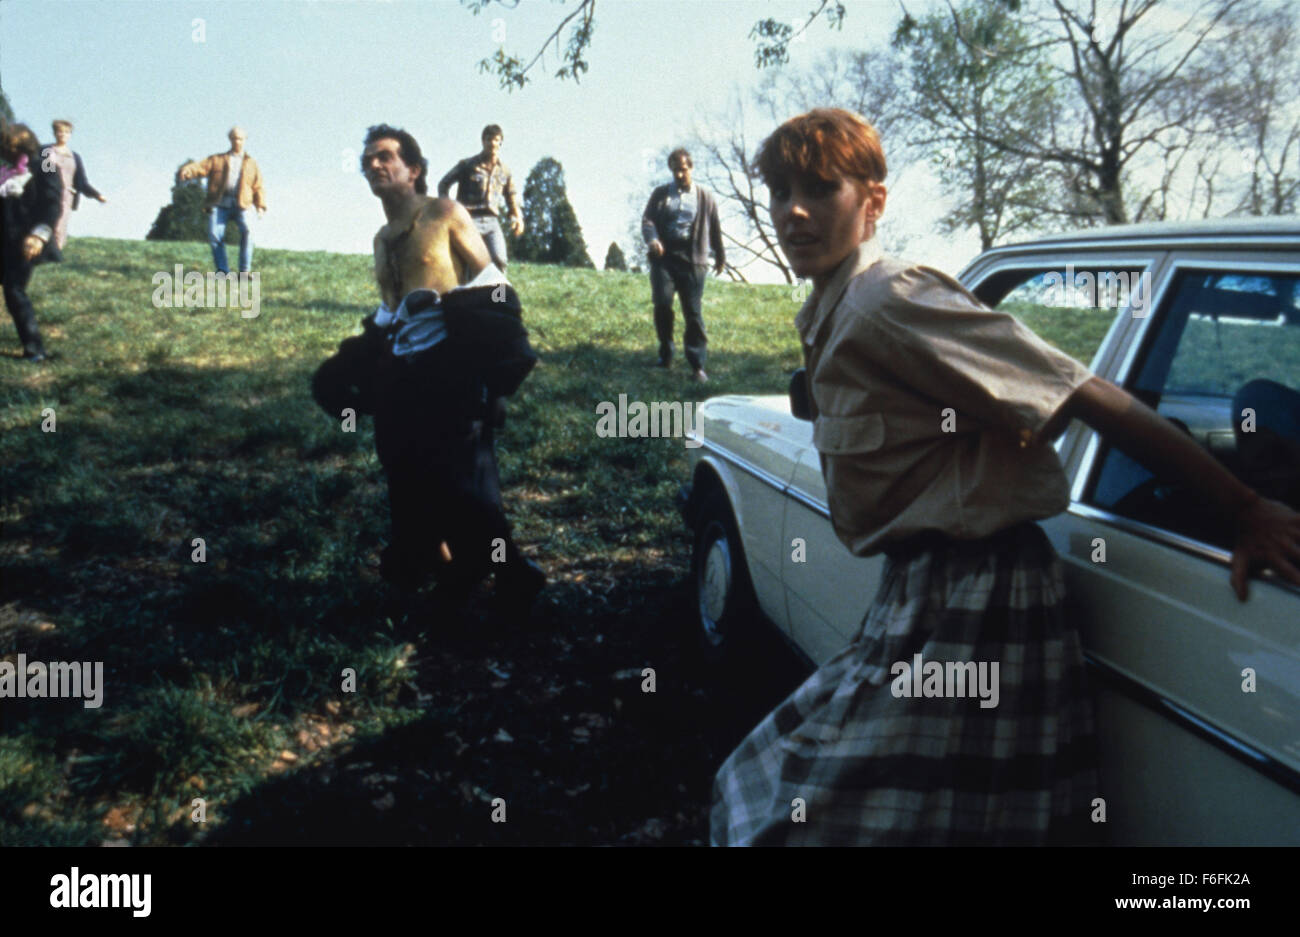 RELEASE DATE: October 19, 1990  TITLE: Night of the Living Dead  STUDIO: Columbia Pictures  DIRECTOR: Tom Savini  PLOT: A remake of George Romero's 1968 black-and-white classic that begins in a cemetery, as the recently-dead return to life - from an unknown cause - and attack the living as their prey. One woman escapes the frightening zombies to take refuge with others in a farmhouse, as every cadaver for miles around hungers for their flesh. Will they make it through the night...that the dead came back to life?  PICTURED: PATRICIA TALLMAN as Barbara.  (Credit Image: c Columbia Pictures/Entert Stock Photo